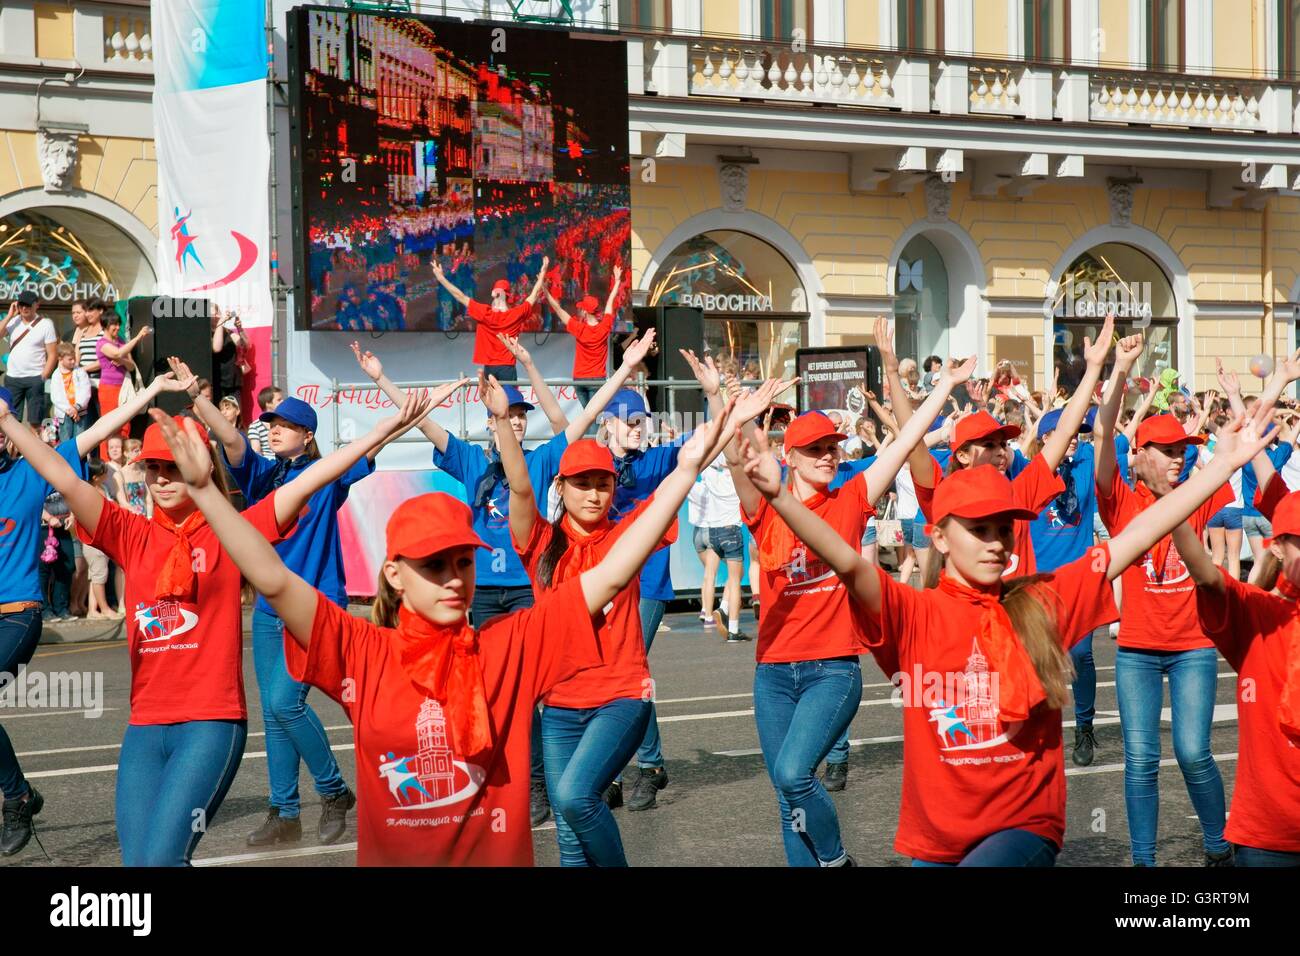 Russia. Schoolchildren perform song and dance routines on Nevsky Prospekt during St. Petersburg Annual City Day festival Stock Photo